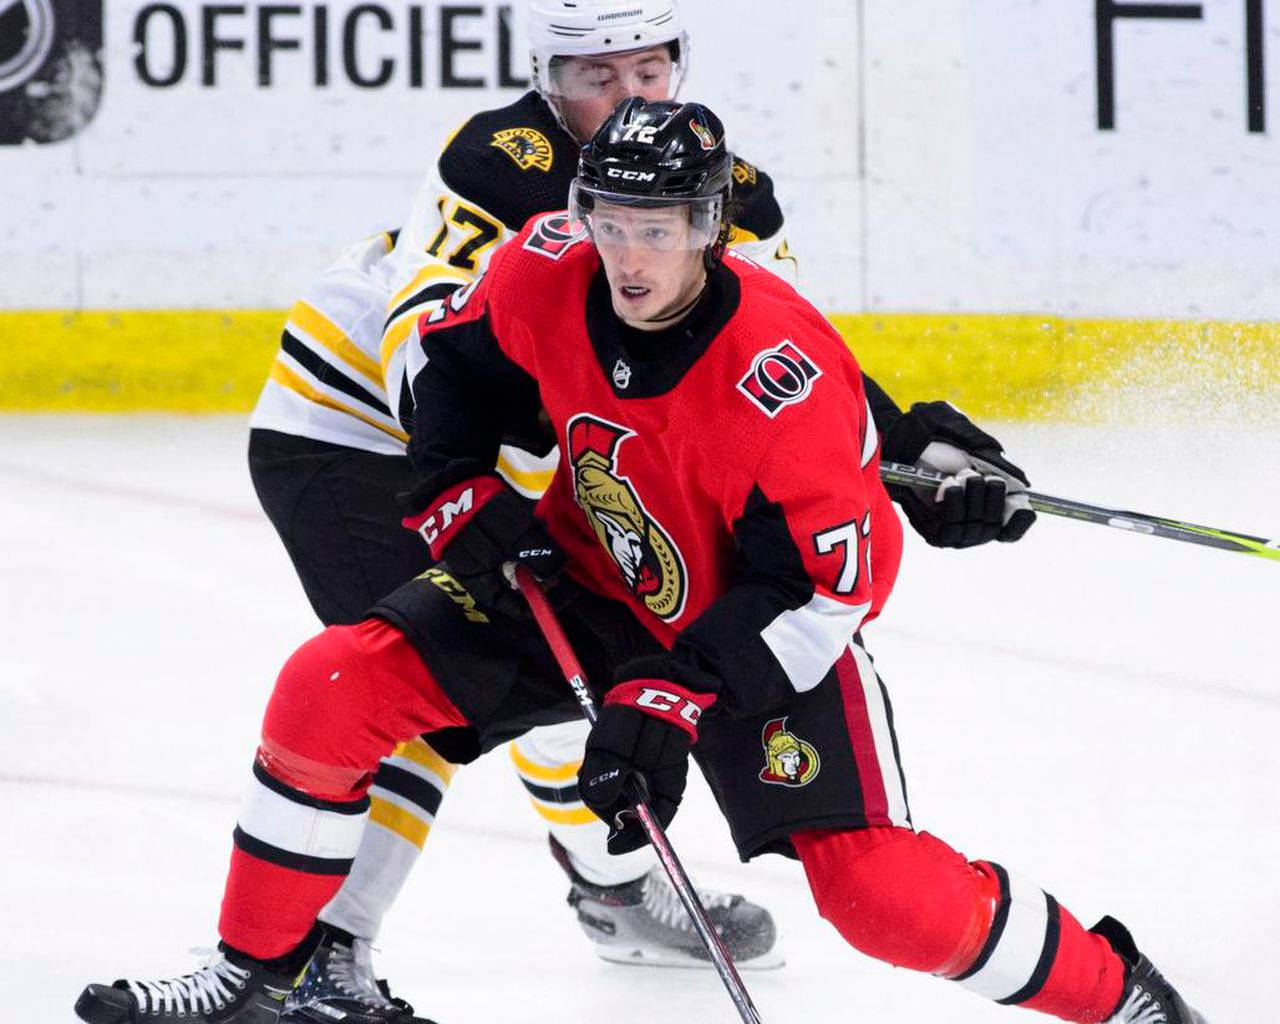 Thomas Chabot, Top-notch Professional Ice Hockey Player in Action Wallpaper